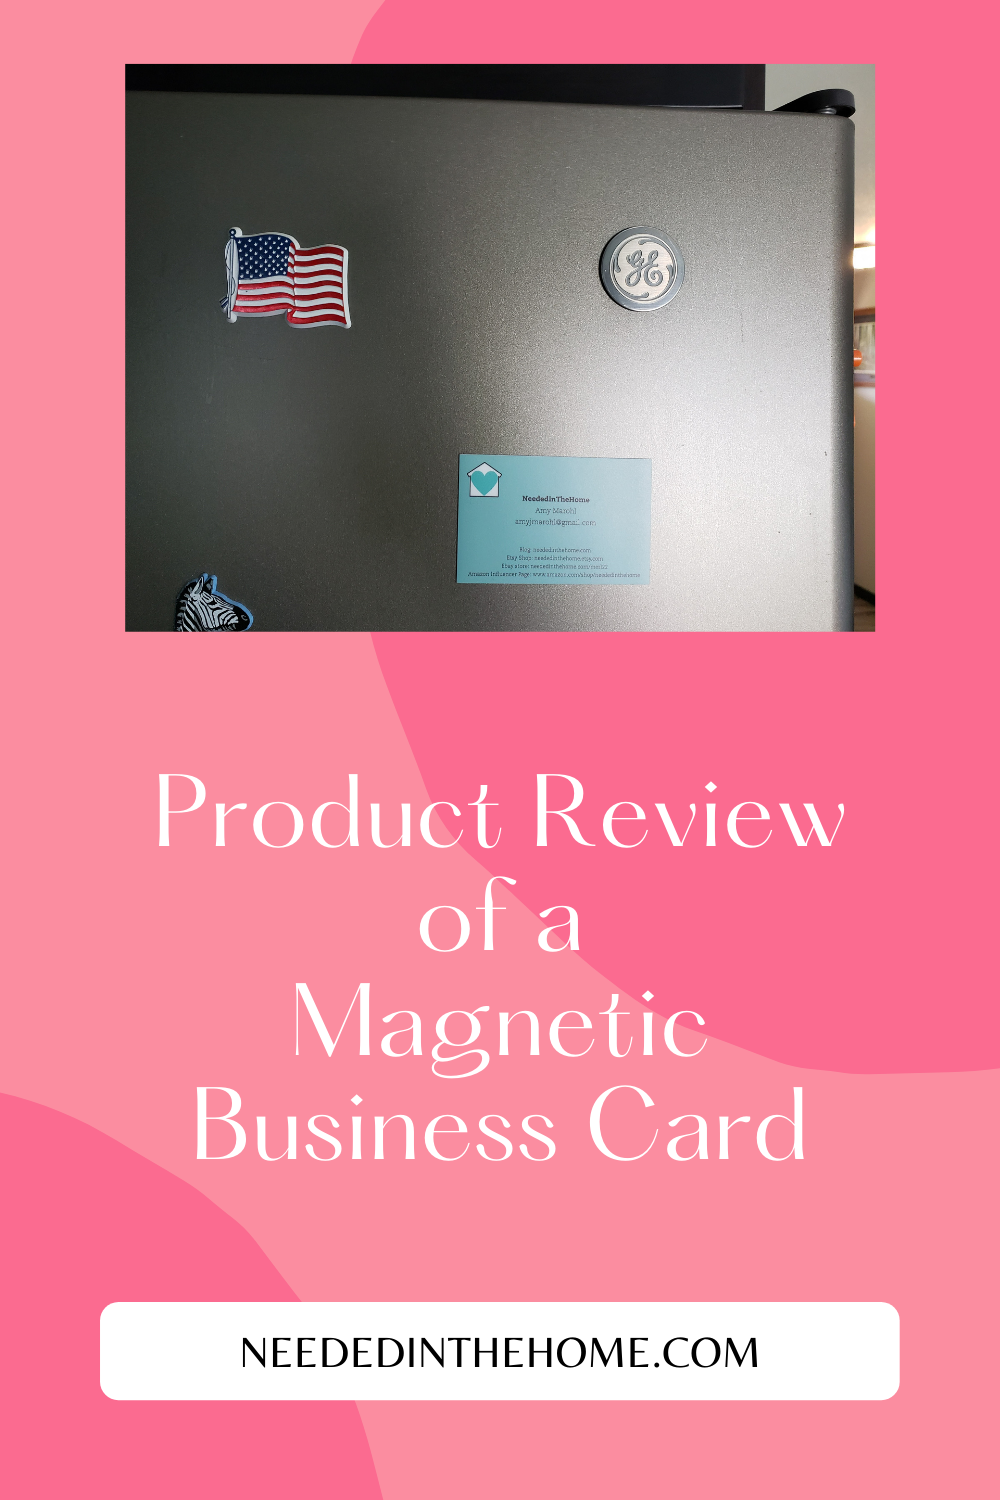 pinterest-pin-description product review of a magnetic business card flag zebra magnetic business card on ge refrigerator neededinthehome